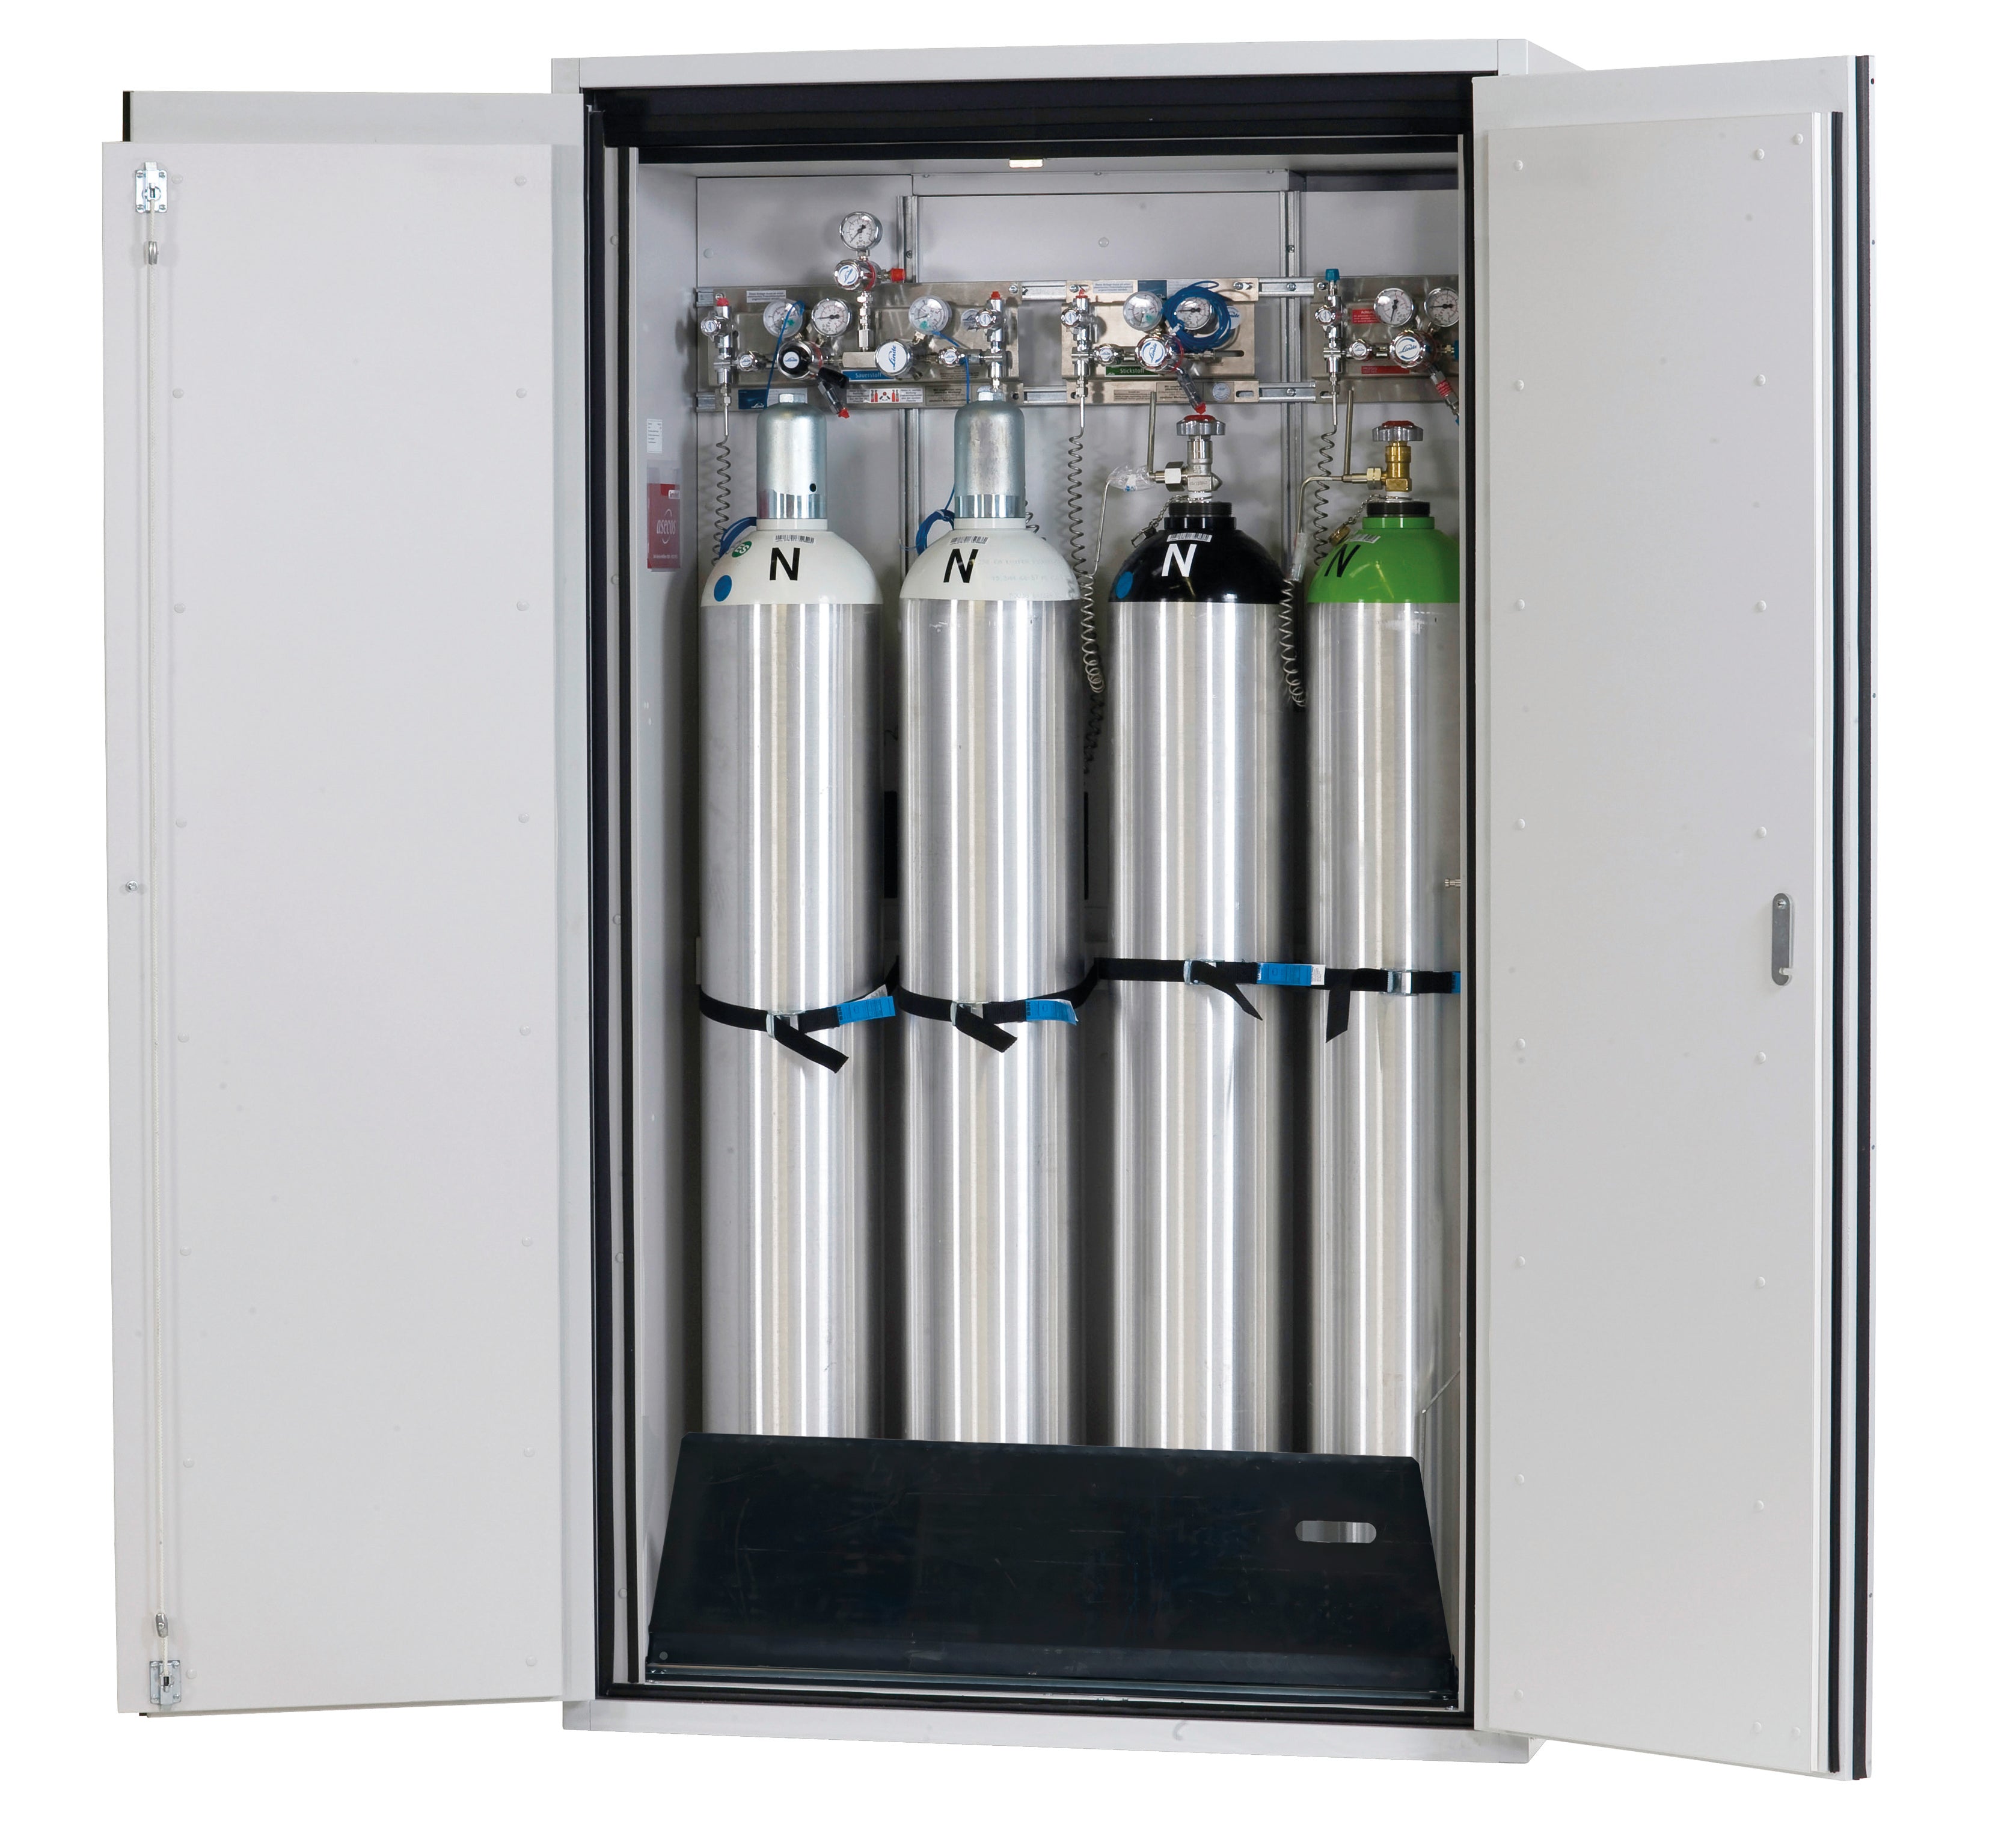 Type 90 compressed gas bottle cabinet G-ULTIMATE-90 model G90.205.120 in light gray RAL 7035 with comfortable interior fittings for 4x compressed gas bottles of 50 liters each